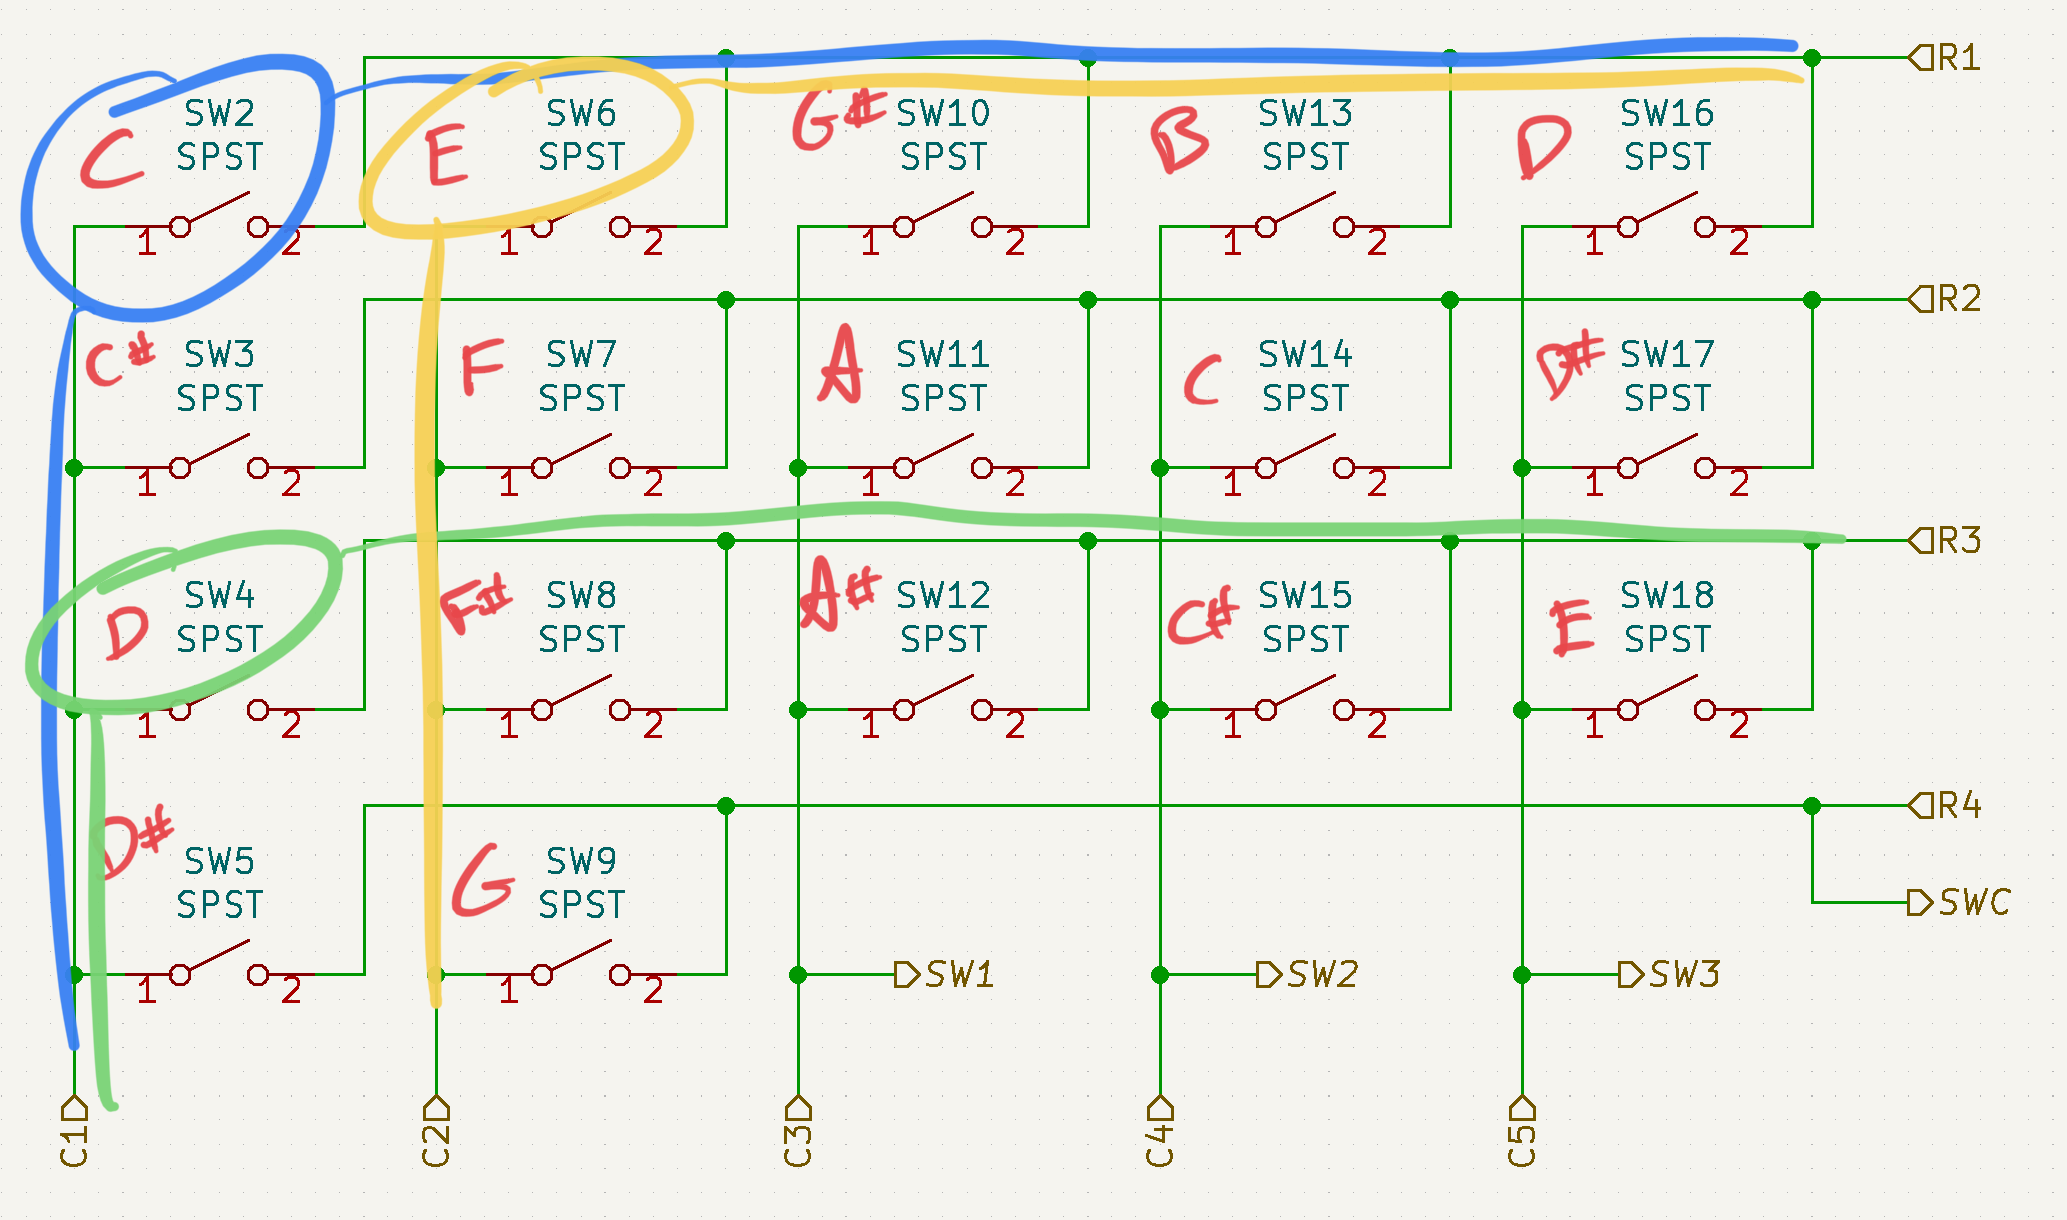 Matrix schematic with C, D, and E matrix points highlighted